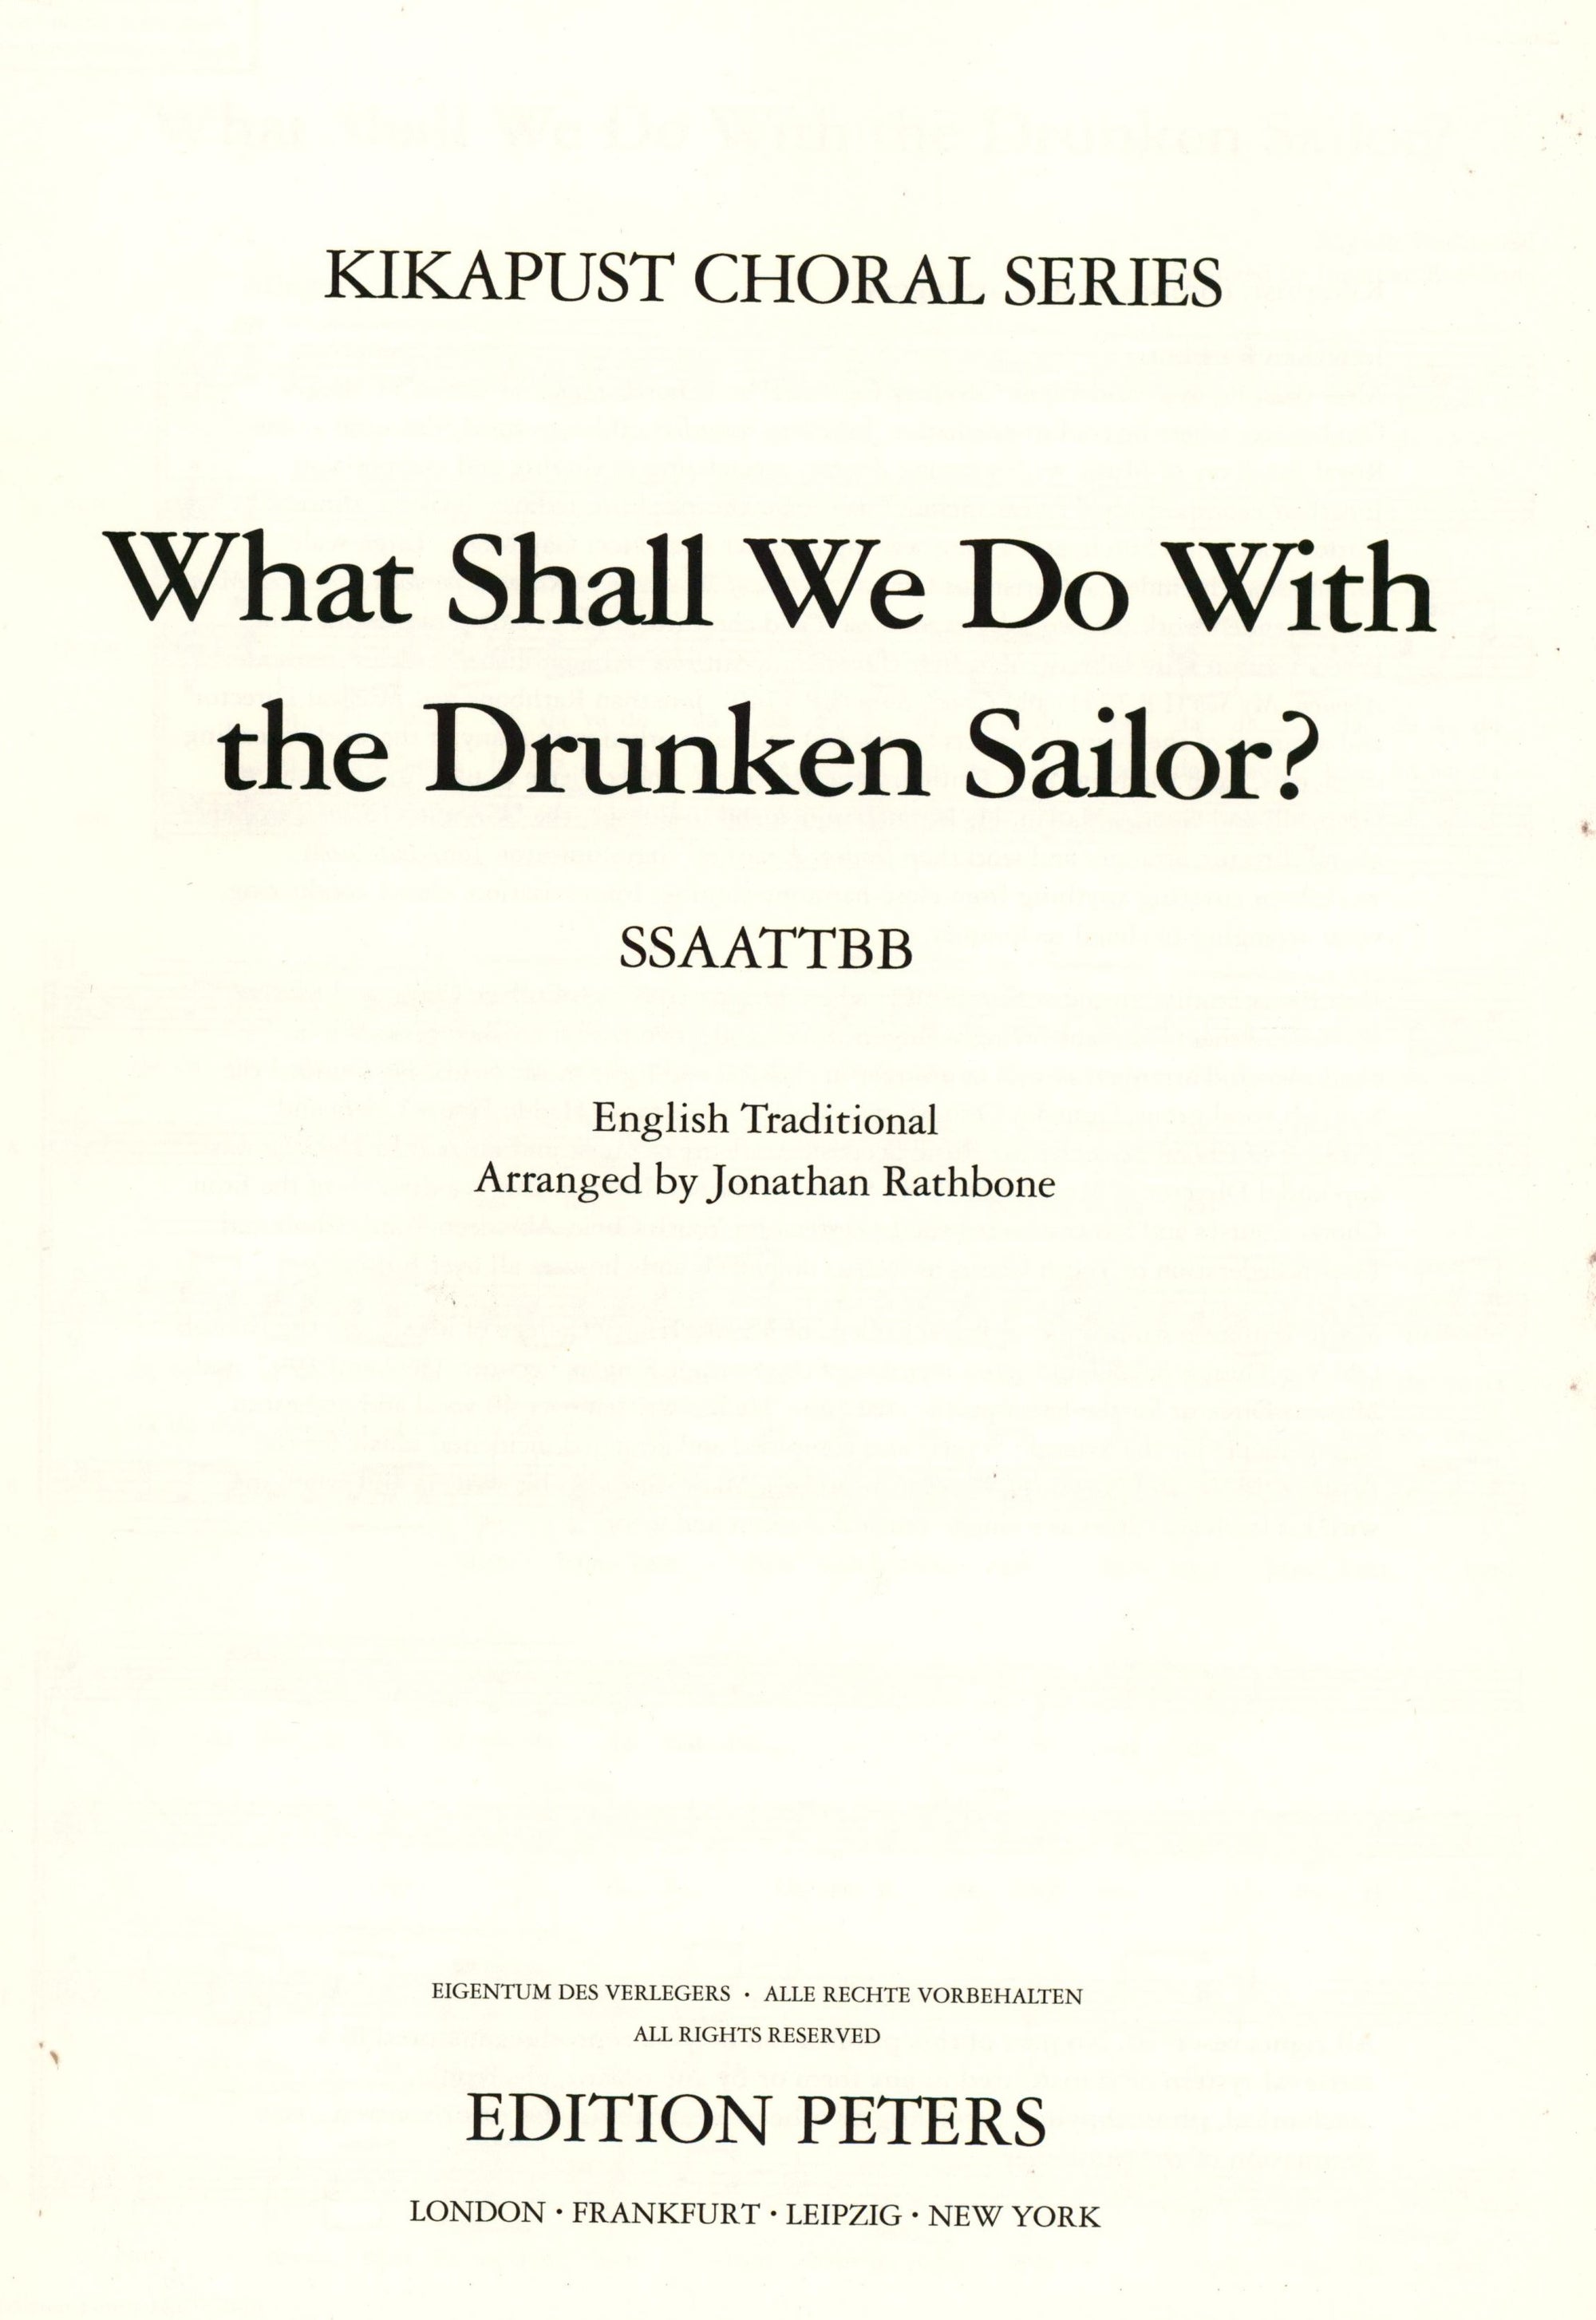 What Shall We Do with the Drunken Sailor? (arr. for SSAATTBB Choir)